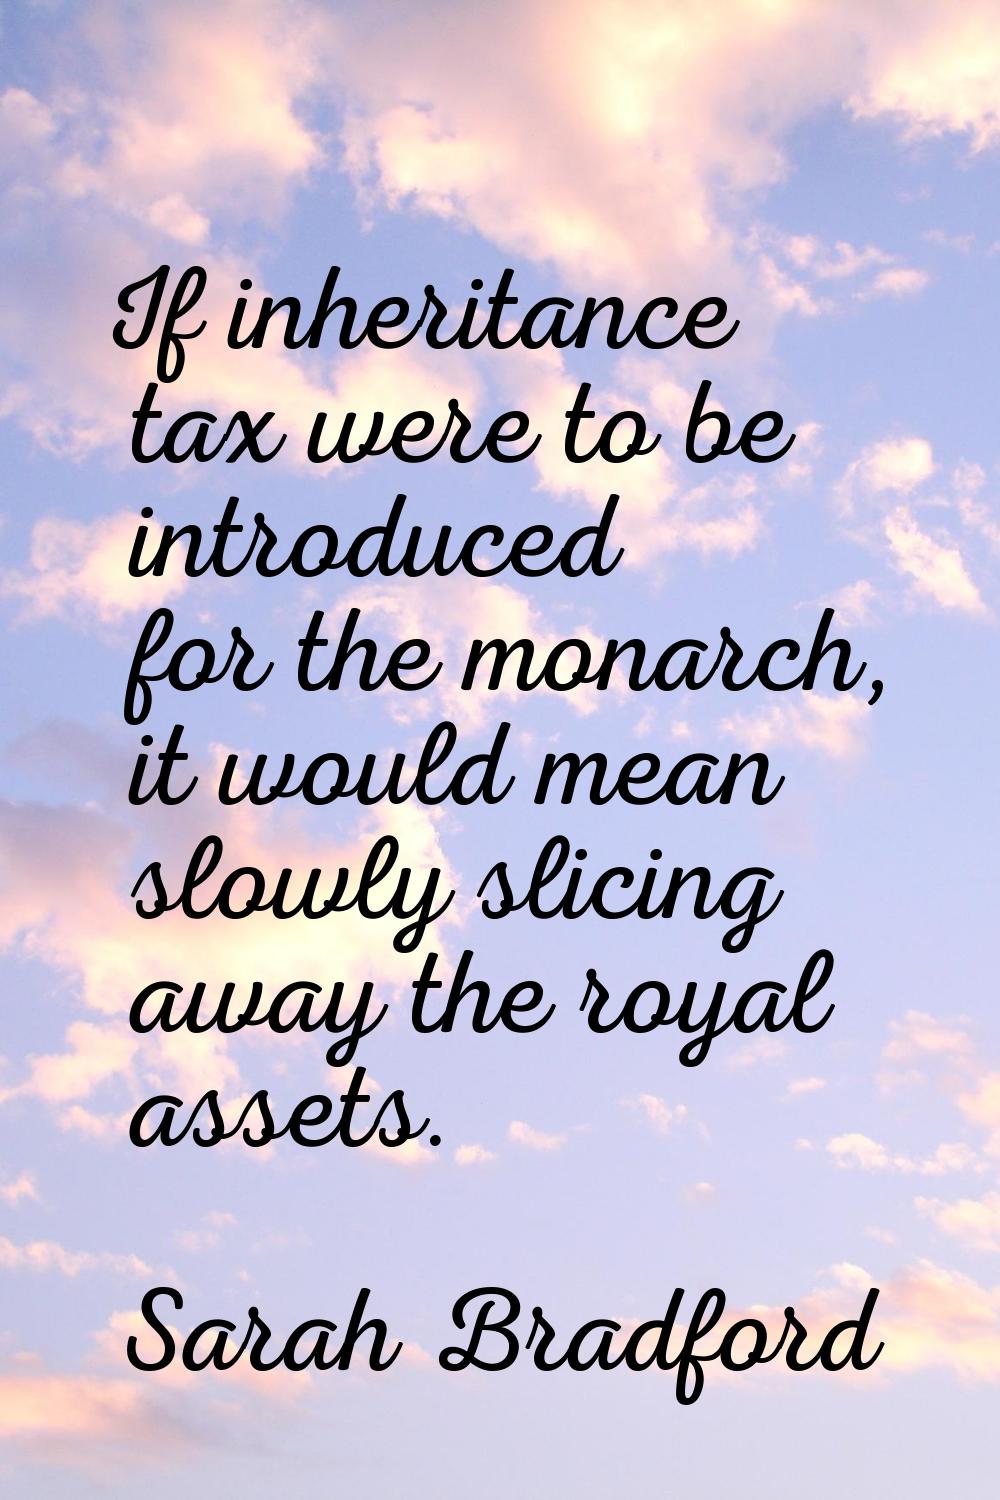 If inheritance tax were to be introduced for the monarch, it would mean slowly slicing away the roy